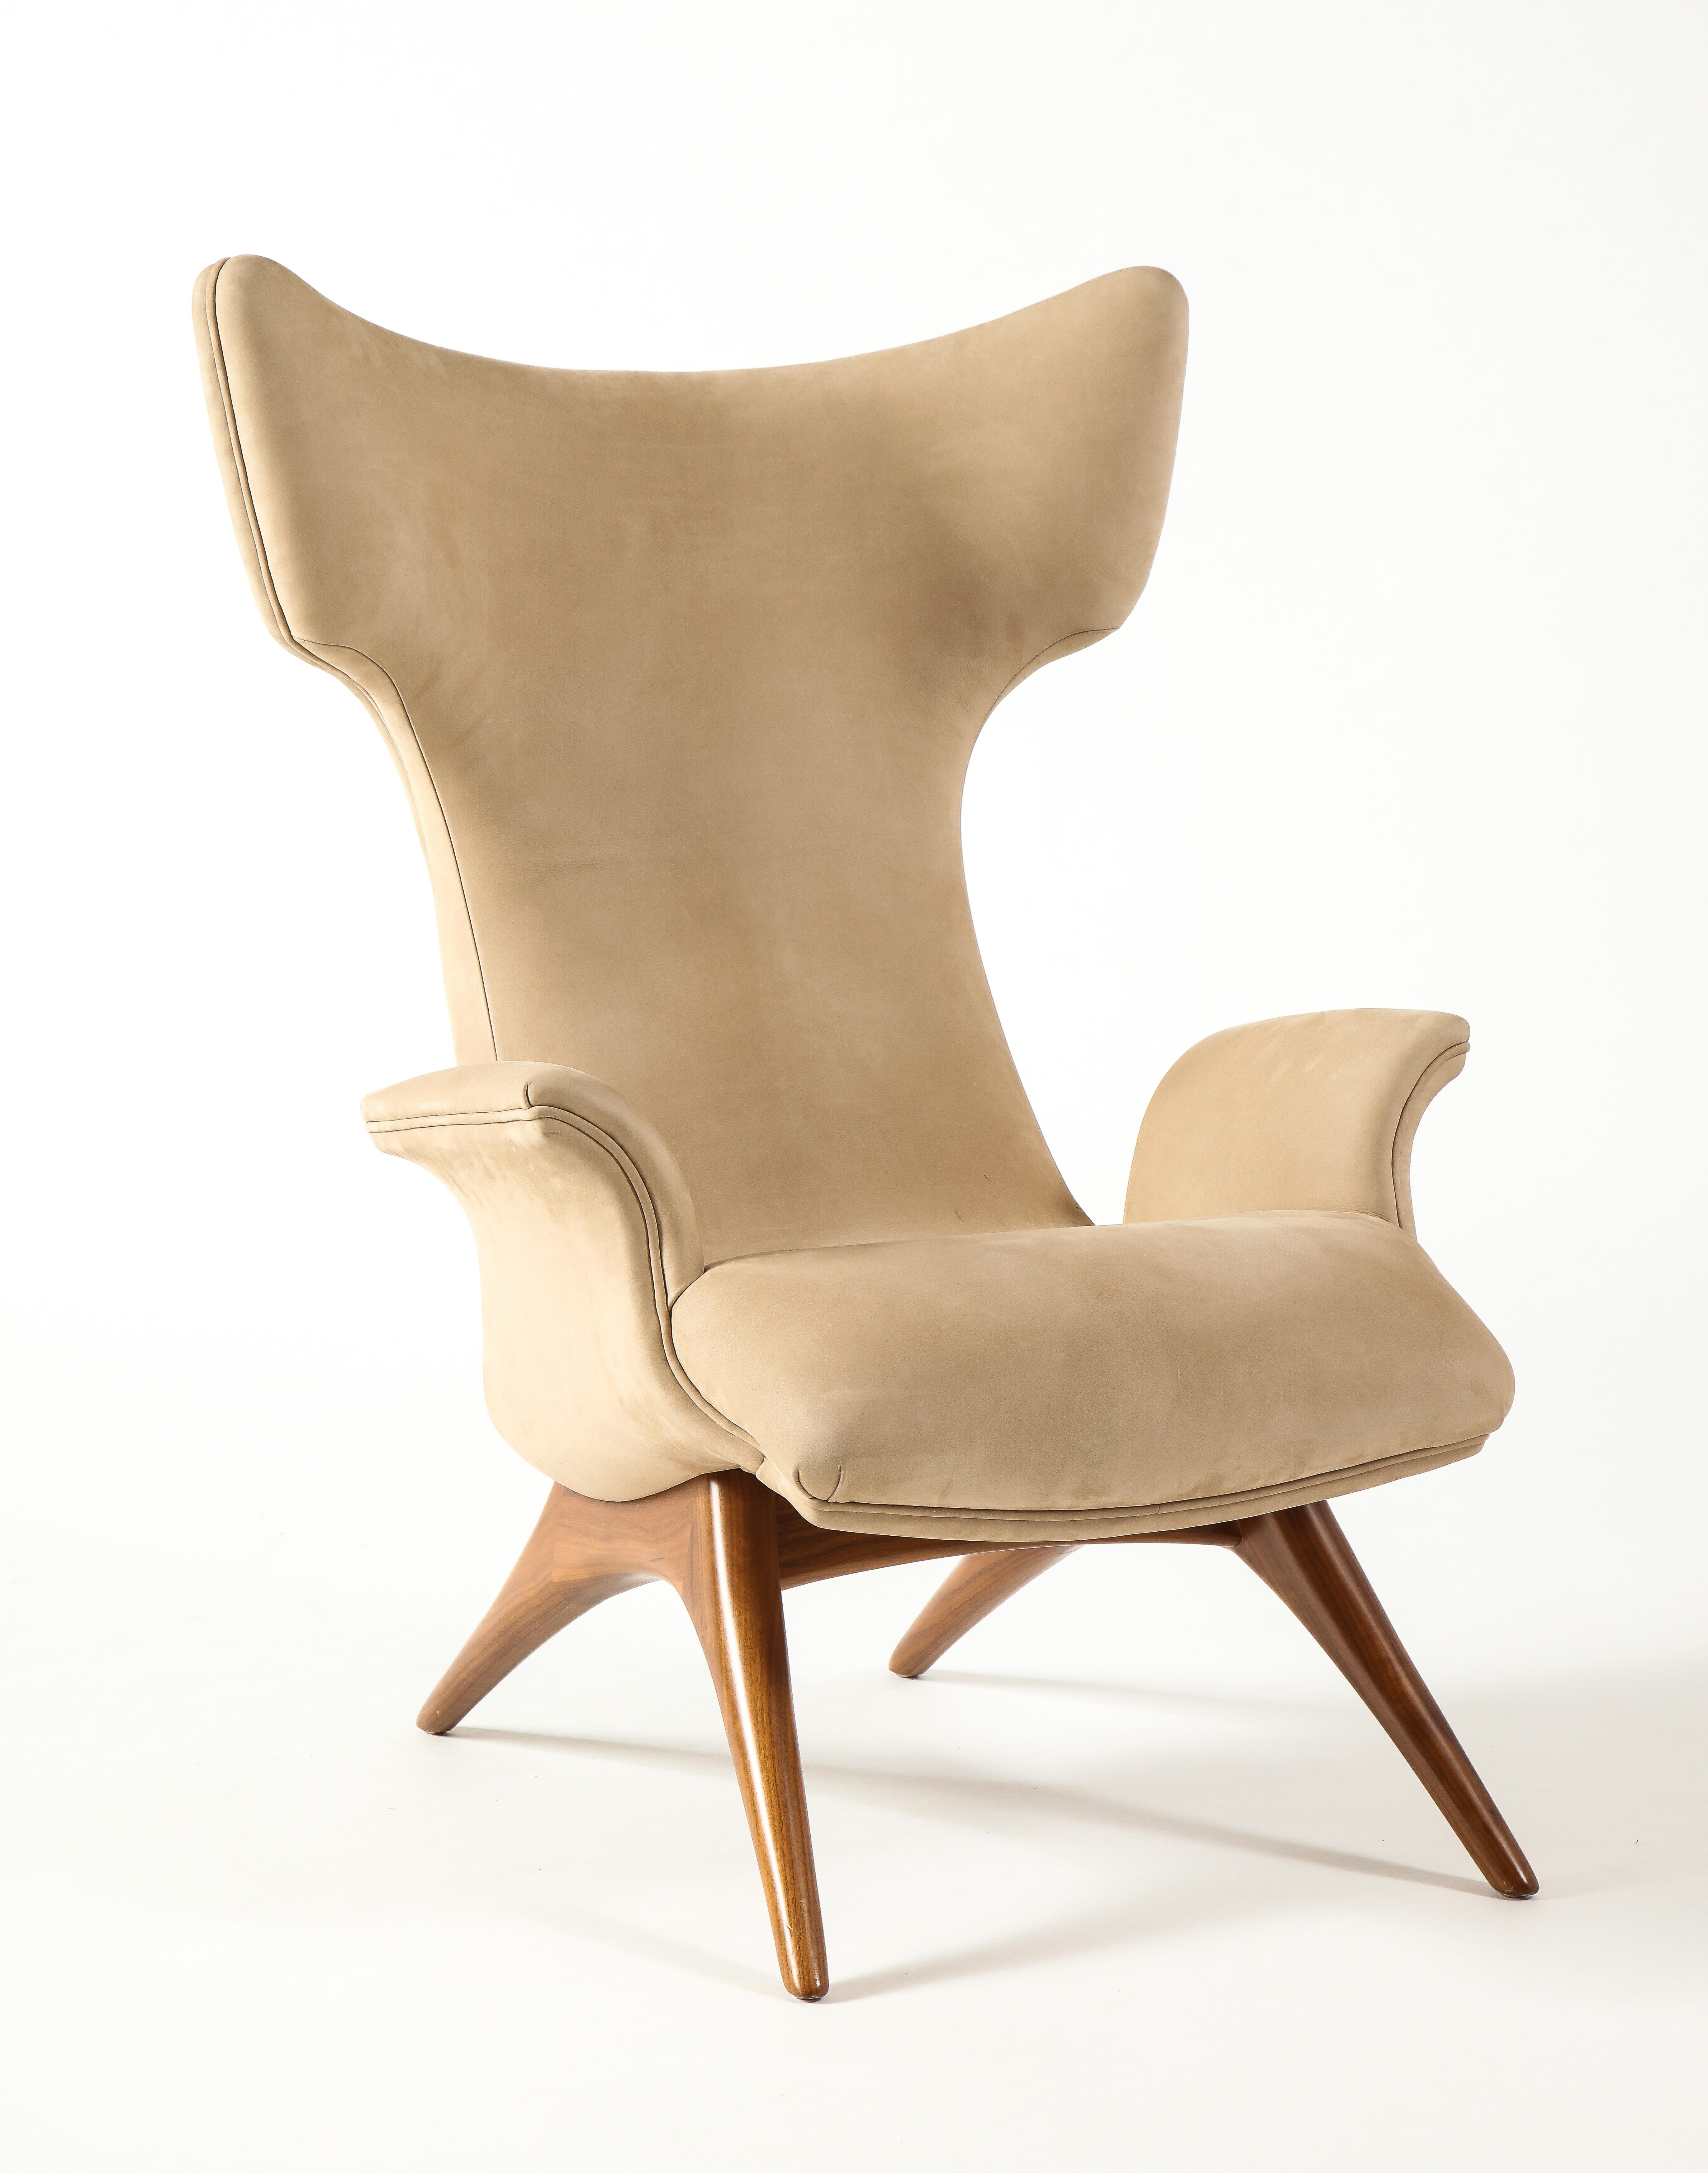 Vladimir Kagan Ondine Chair with Sueded Leather Upholstery & Natural Walnut Base 11